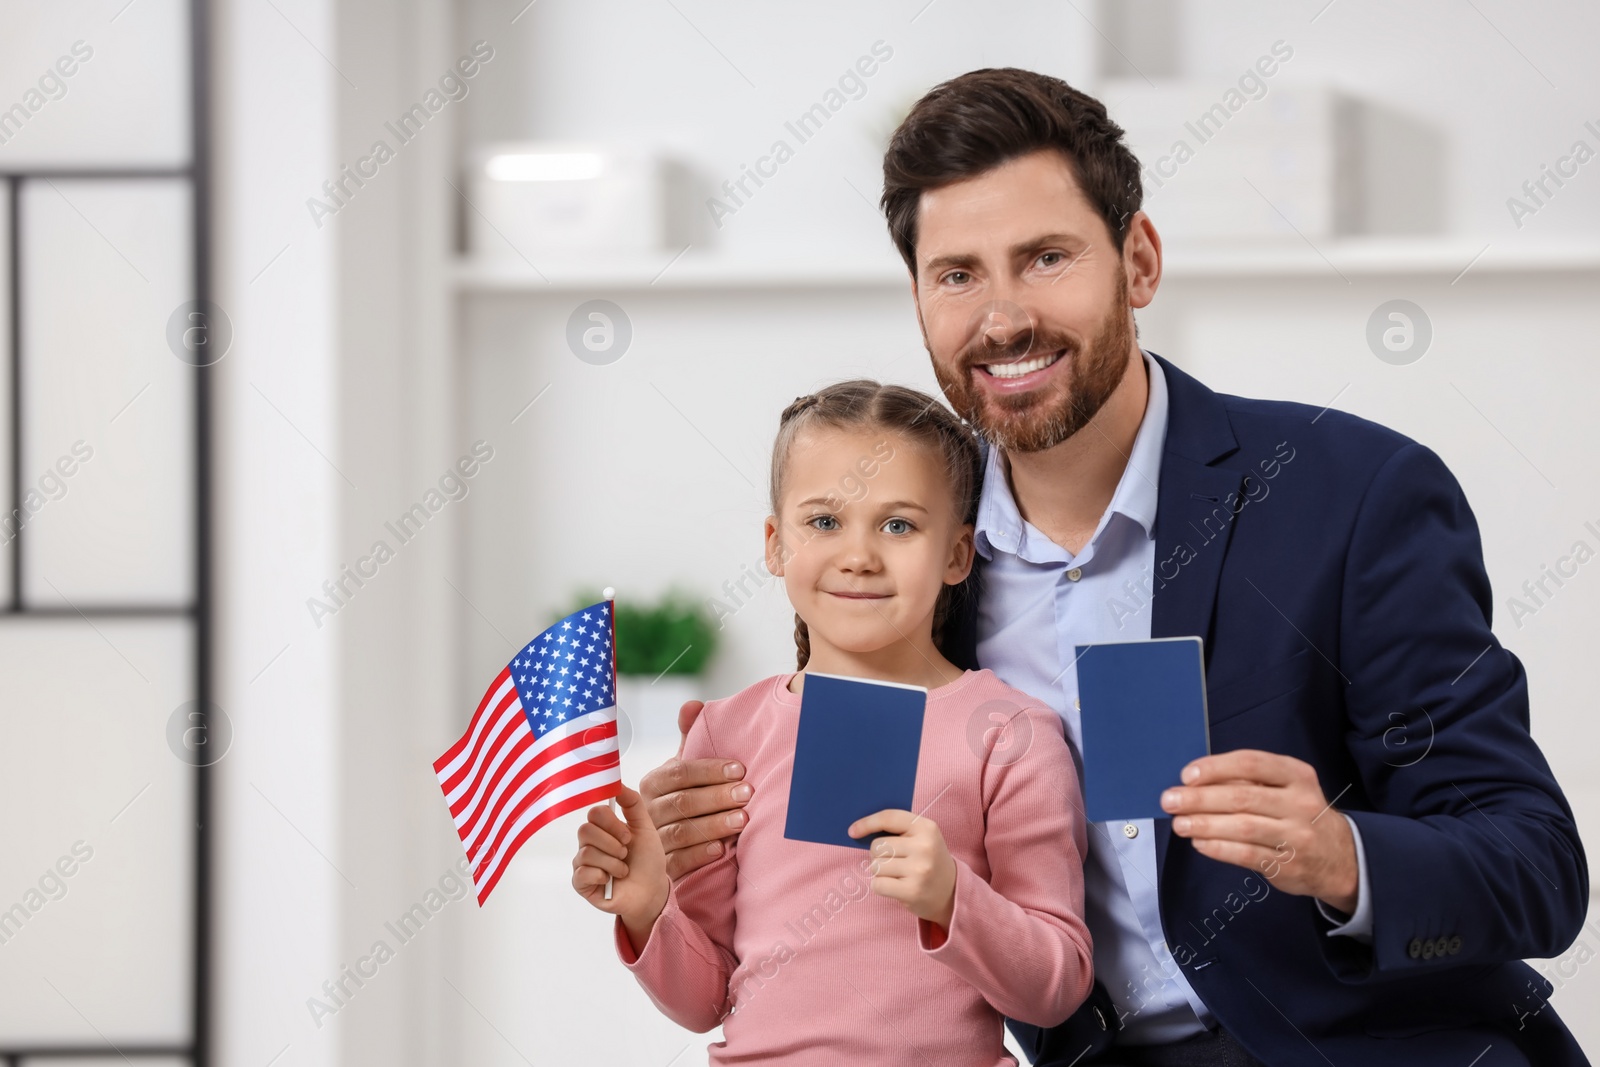 Photo of Immigration. Happy man with his daughter holding passports and American flag indoors, space for text